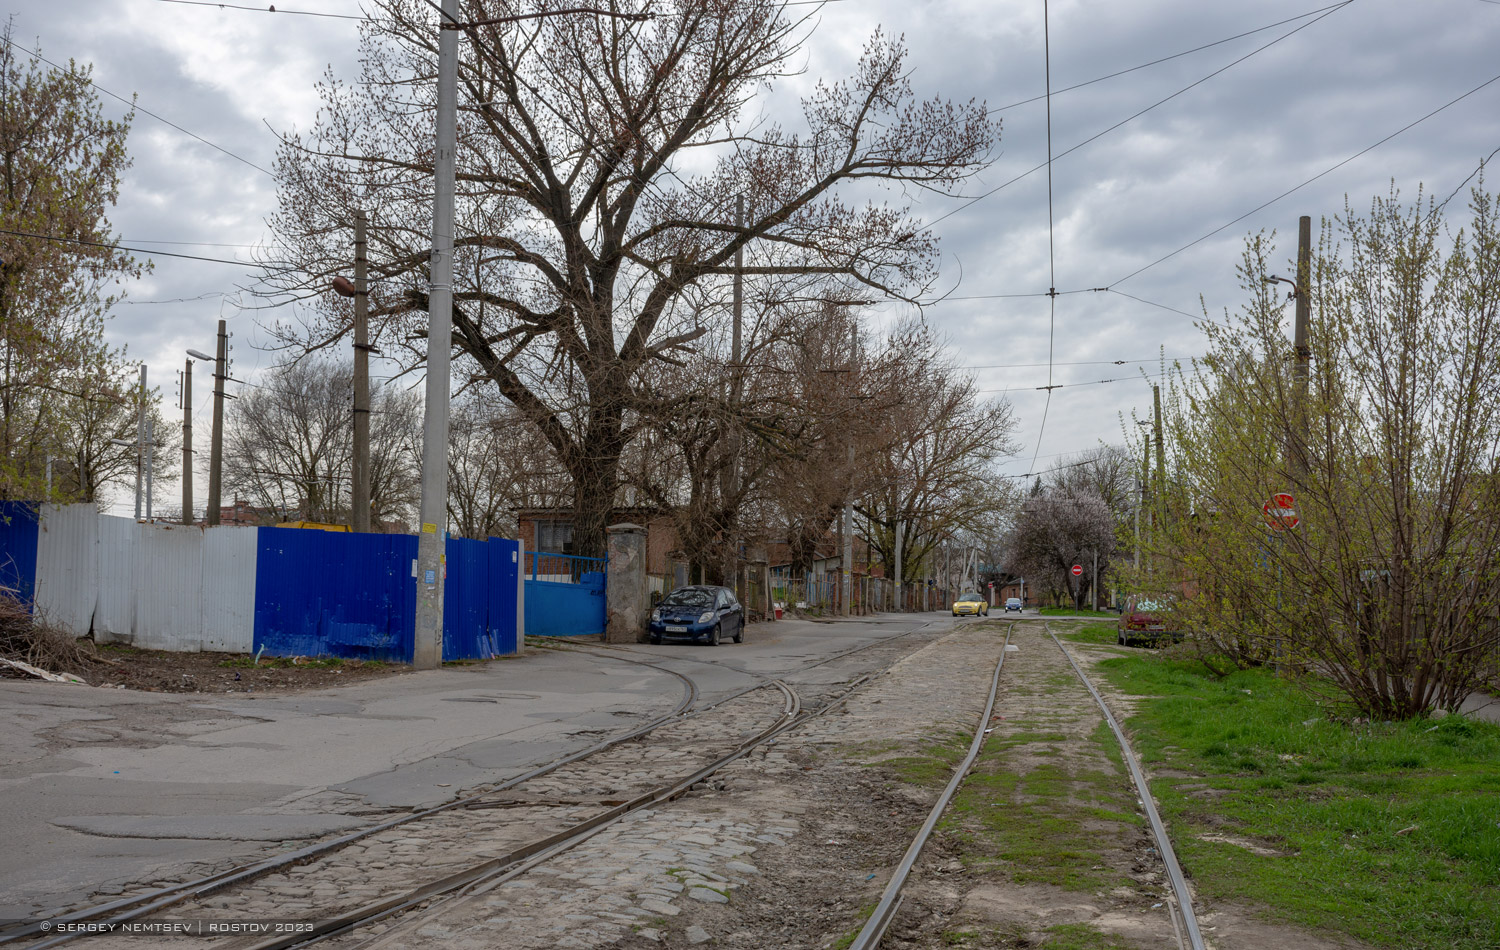 Rostov-sur-le-Don — Tramway Lines and Infrastructure